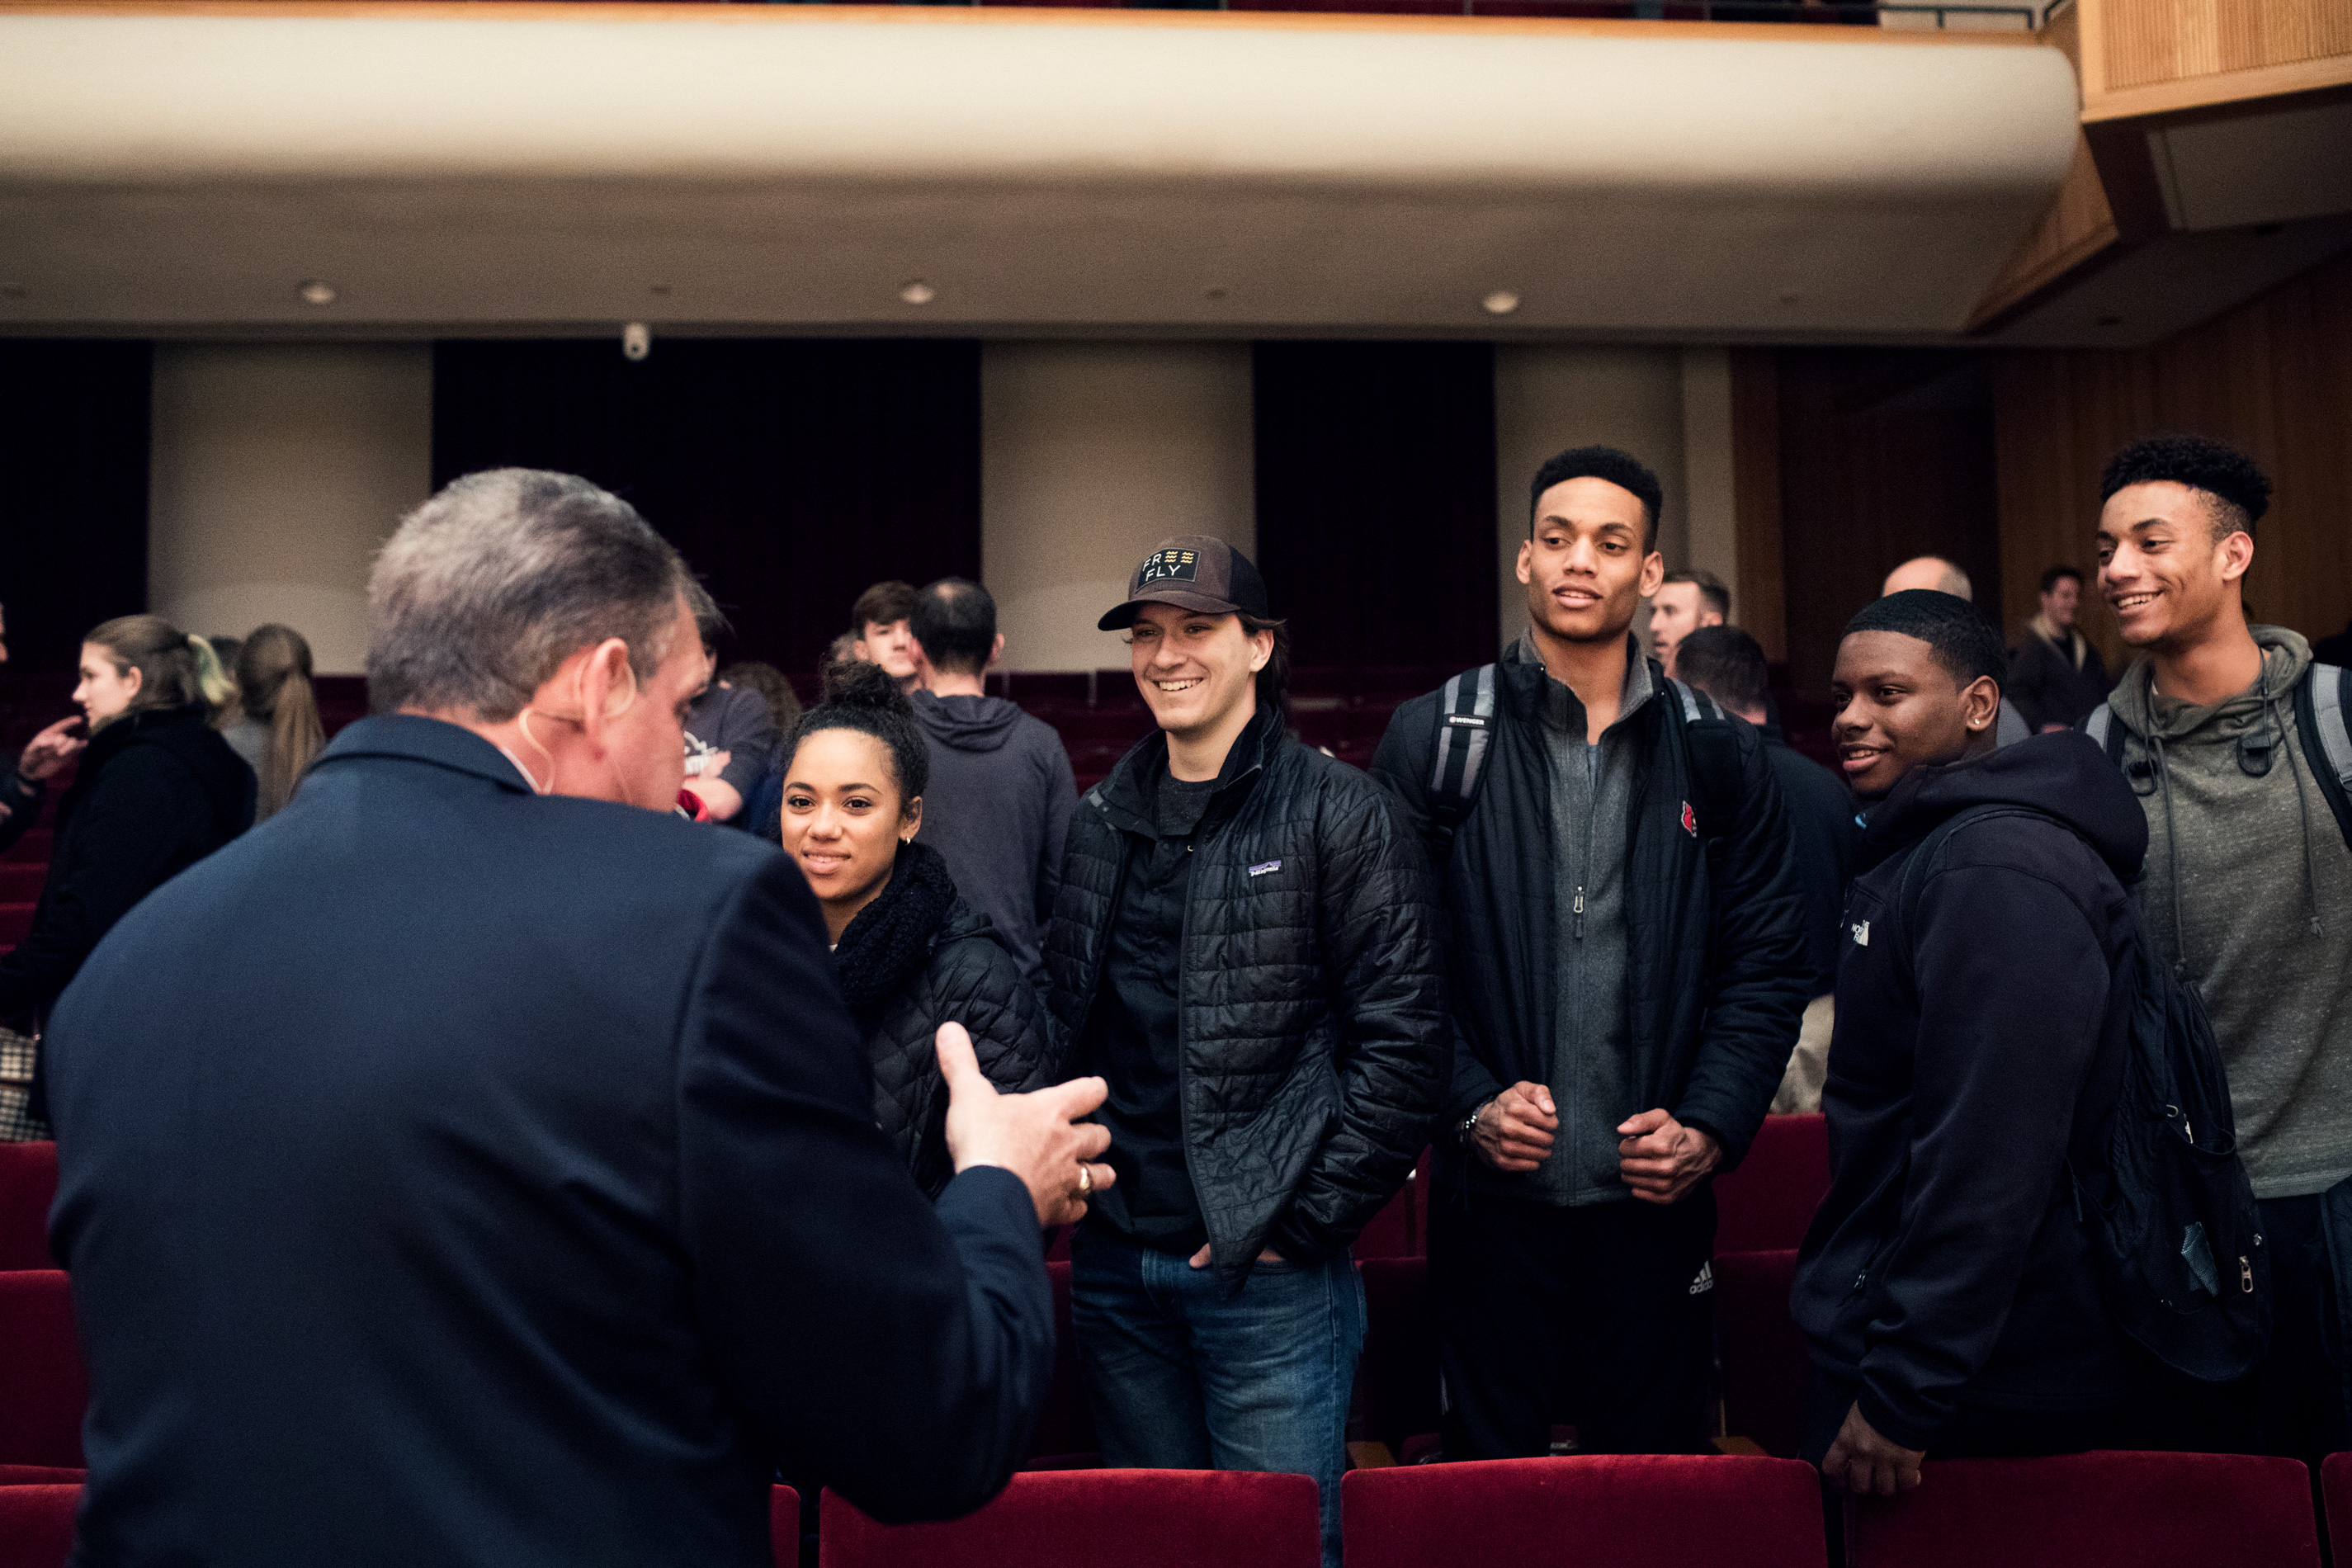 Mohler talks with students after the inaugural Ask Anything Tour event at the University of Louisville.